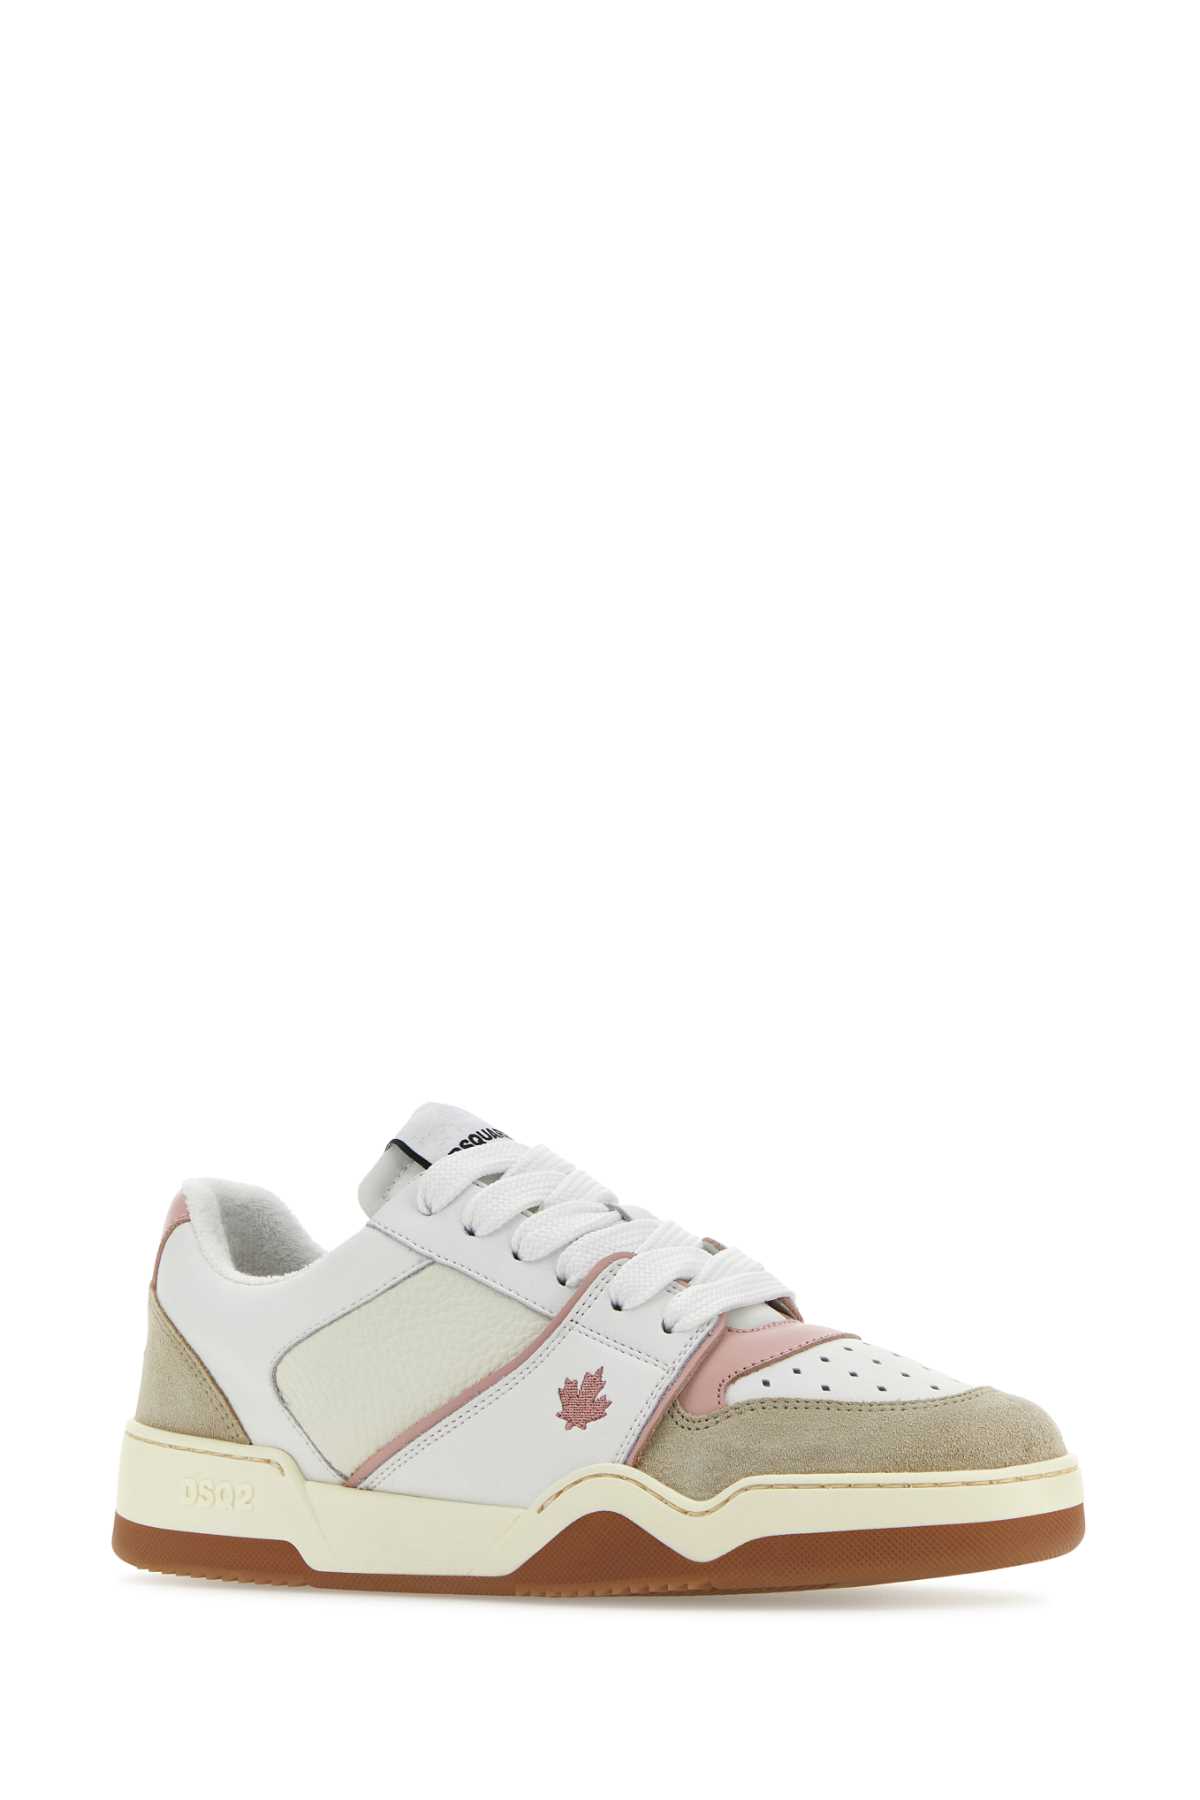 Dsquared2 Multicolor Leather And Suede Spiker Sneakers In Whitebeigerose